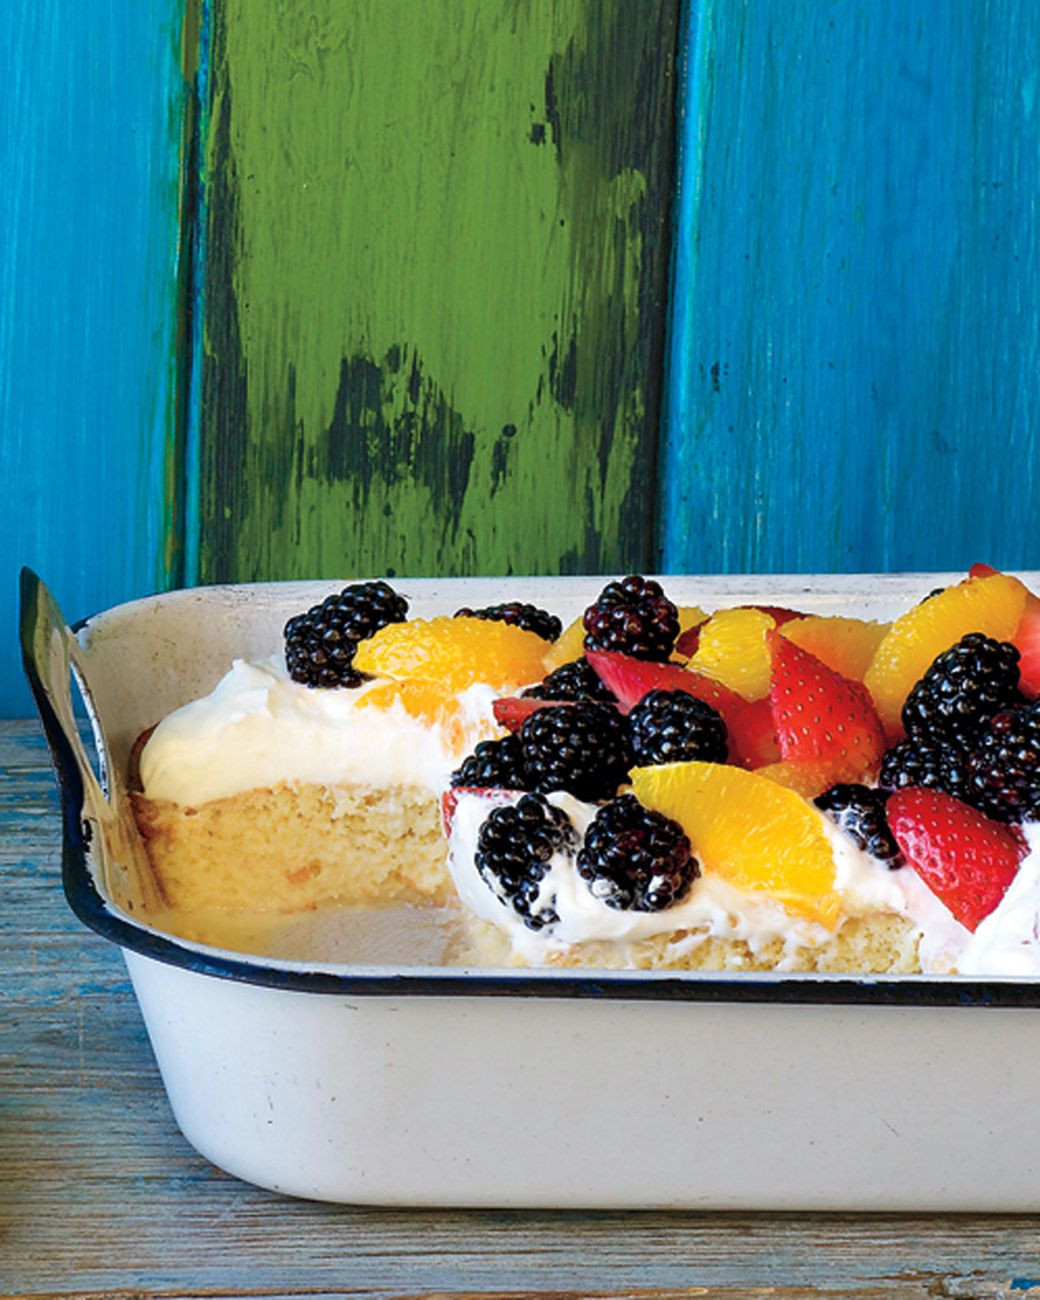 Authentic Tres Leches Cake Recipe With Fruit
 Tres Leches Cake Recipe